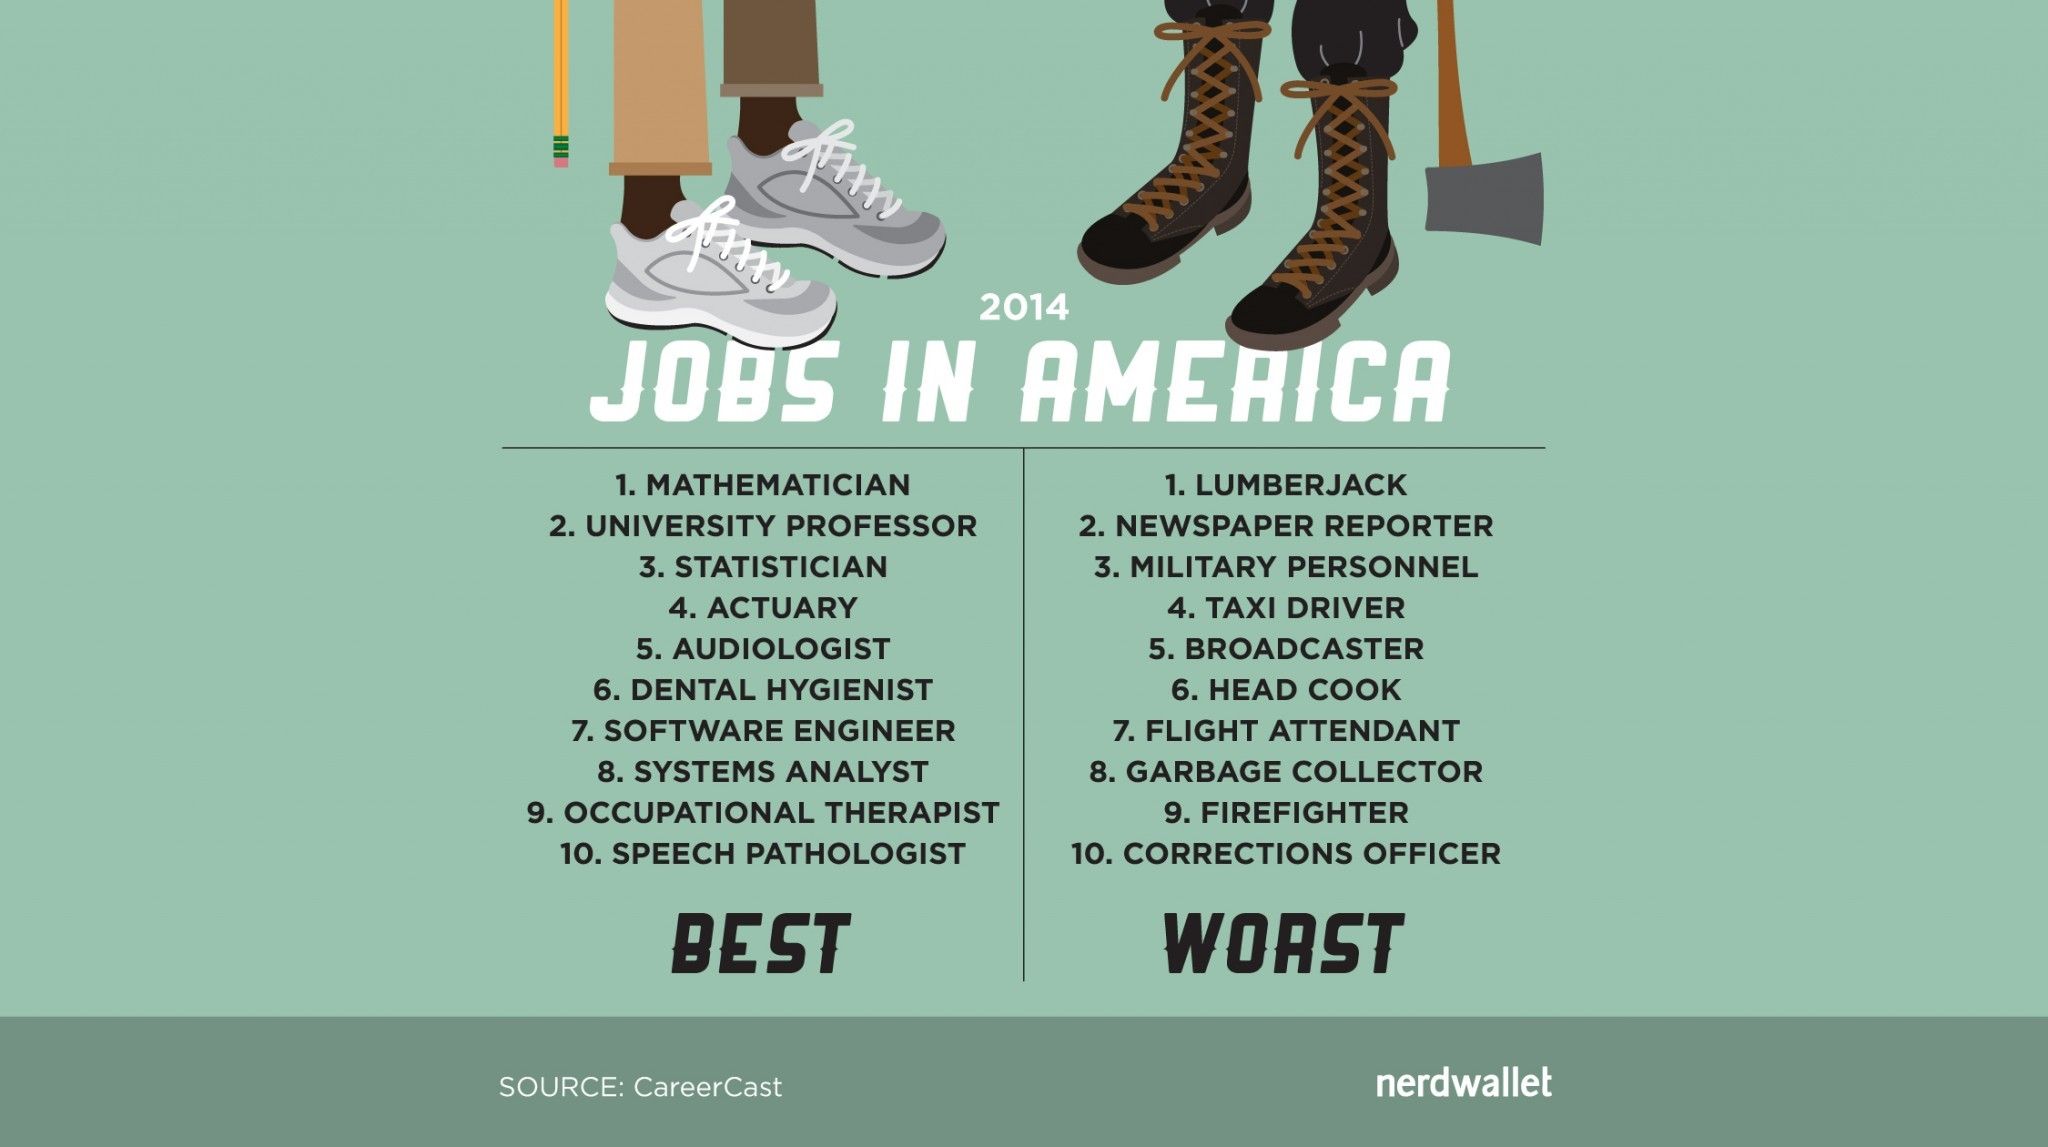 The Best and Worst Jobs in America Are ... - NerdWallet